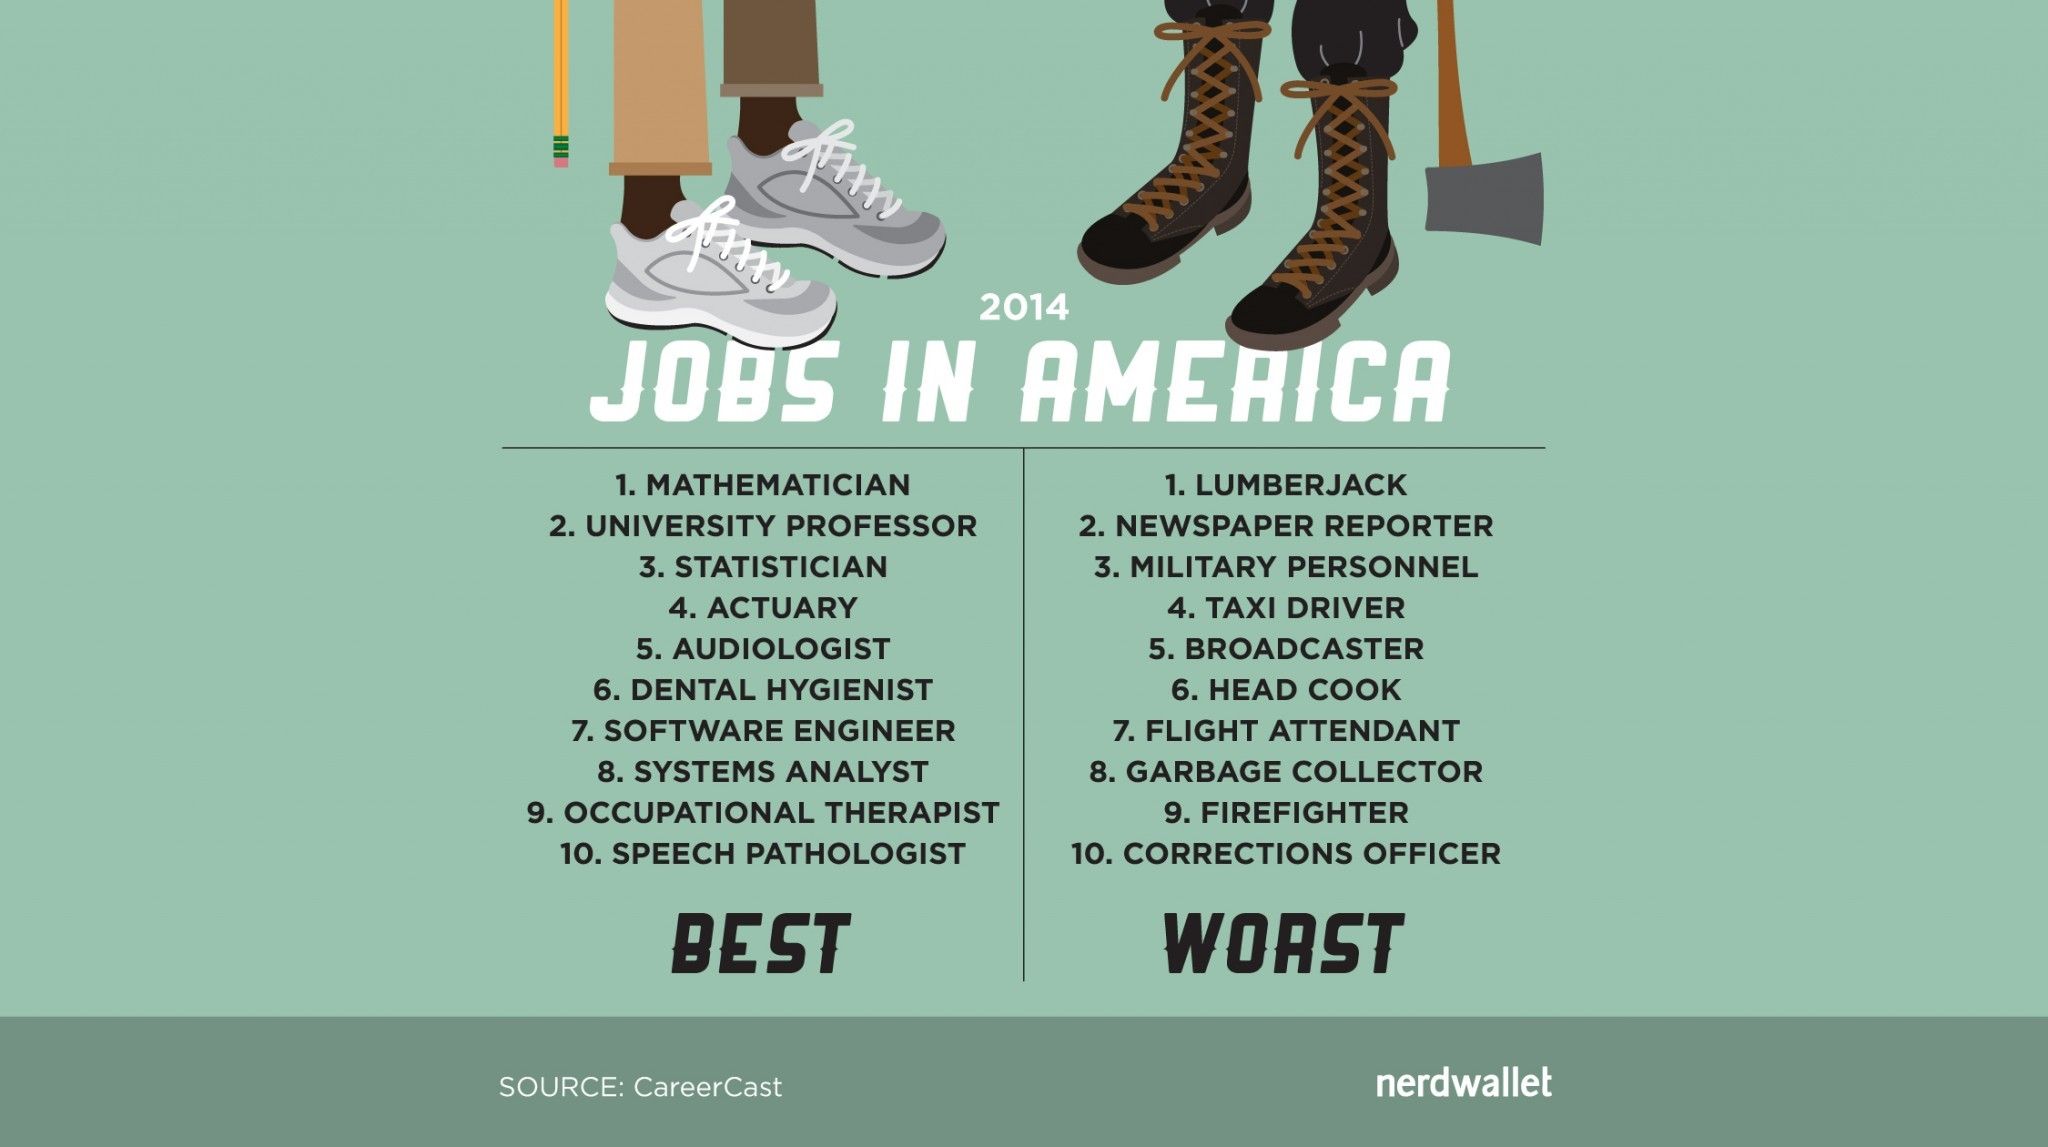 The Best and Worst Jobs in America Are ... - NerdWallet